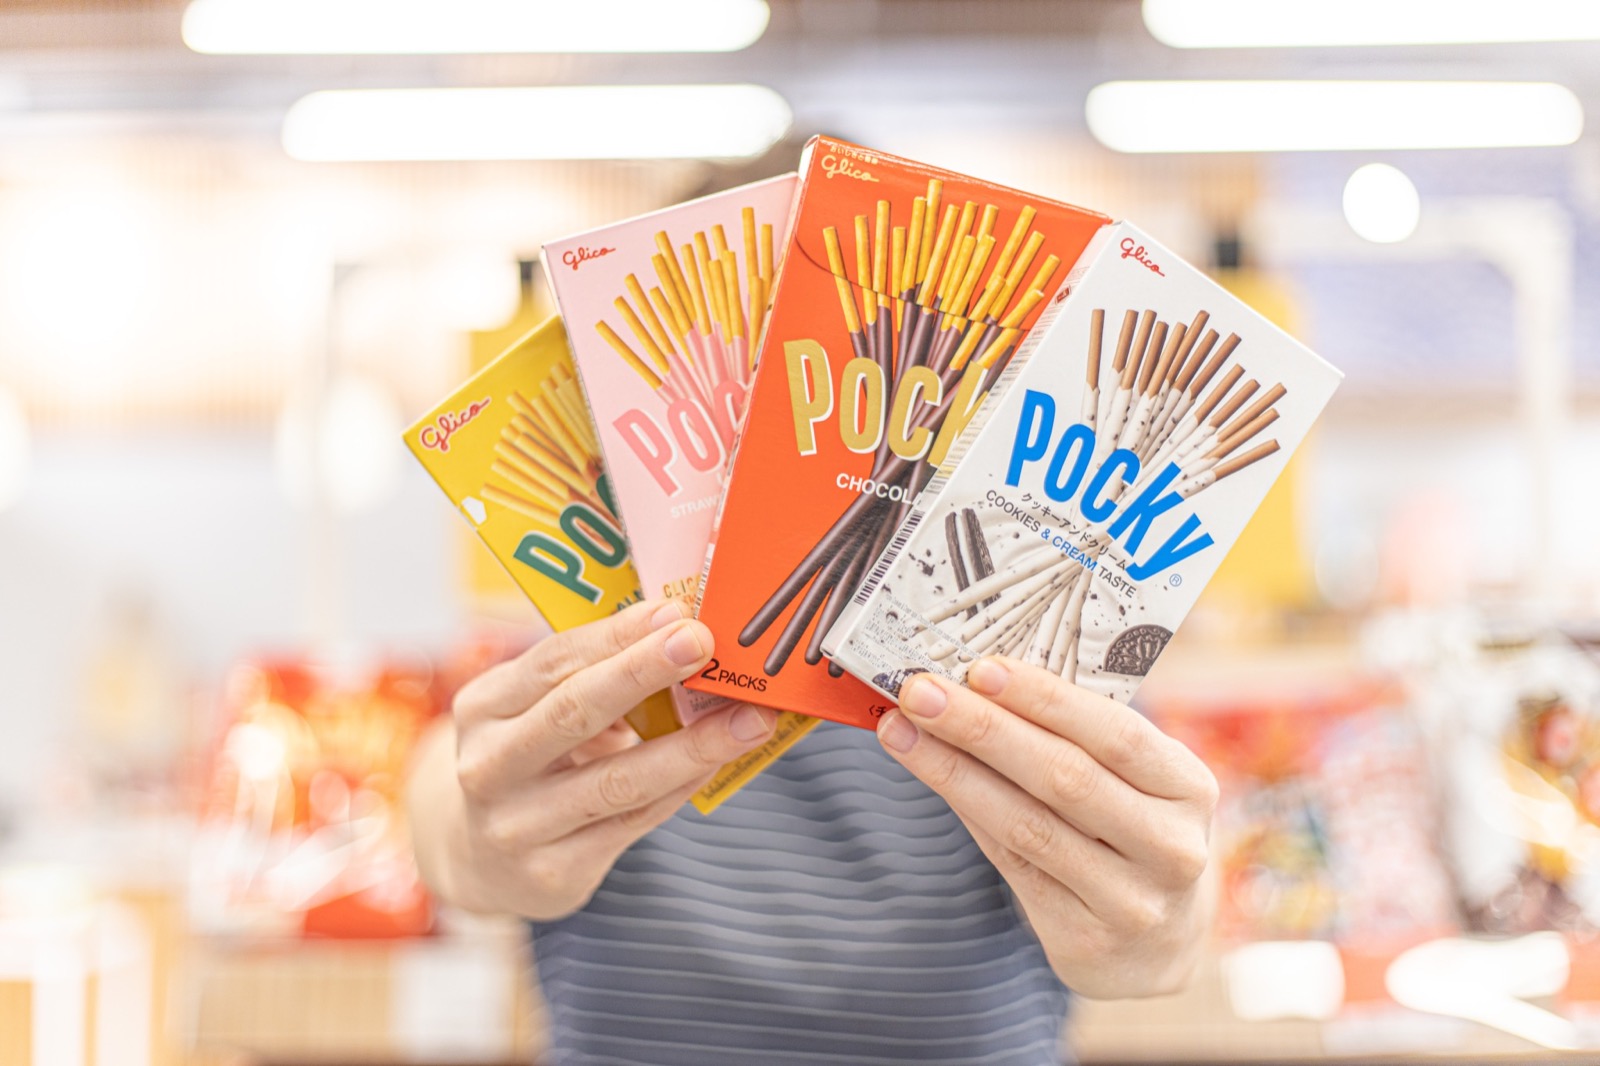 If You Like 22 of 30 Things Then You Definitely Have We… Quiz Pocky Sticks